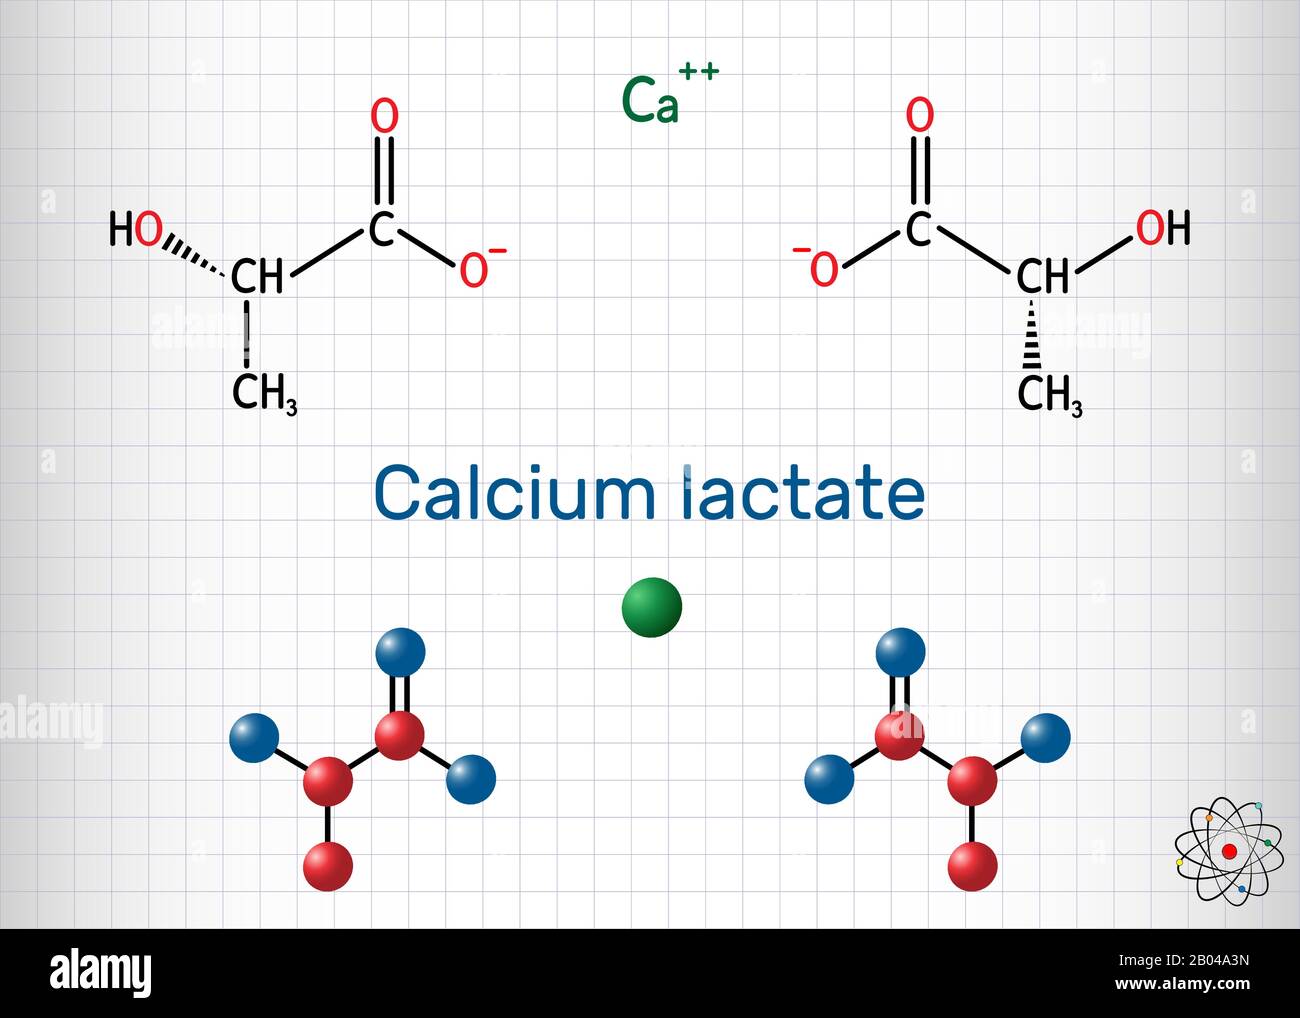 Calcium lactate, C6H10CaO6, lactate anion molecule. It is used in medicine to treat calcium deficiencies and as food additive E327. Sheet of paper in Stock Vector